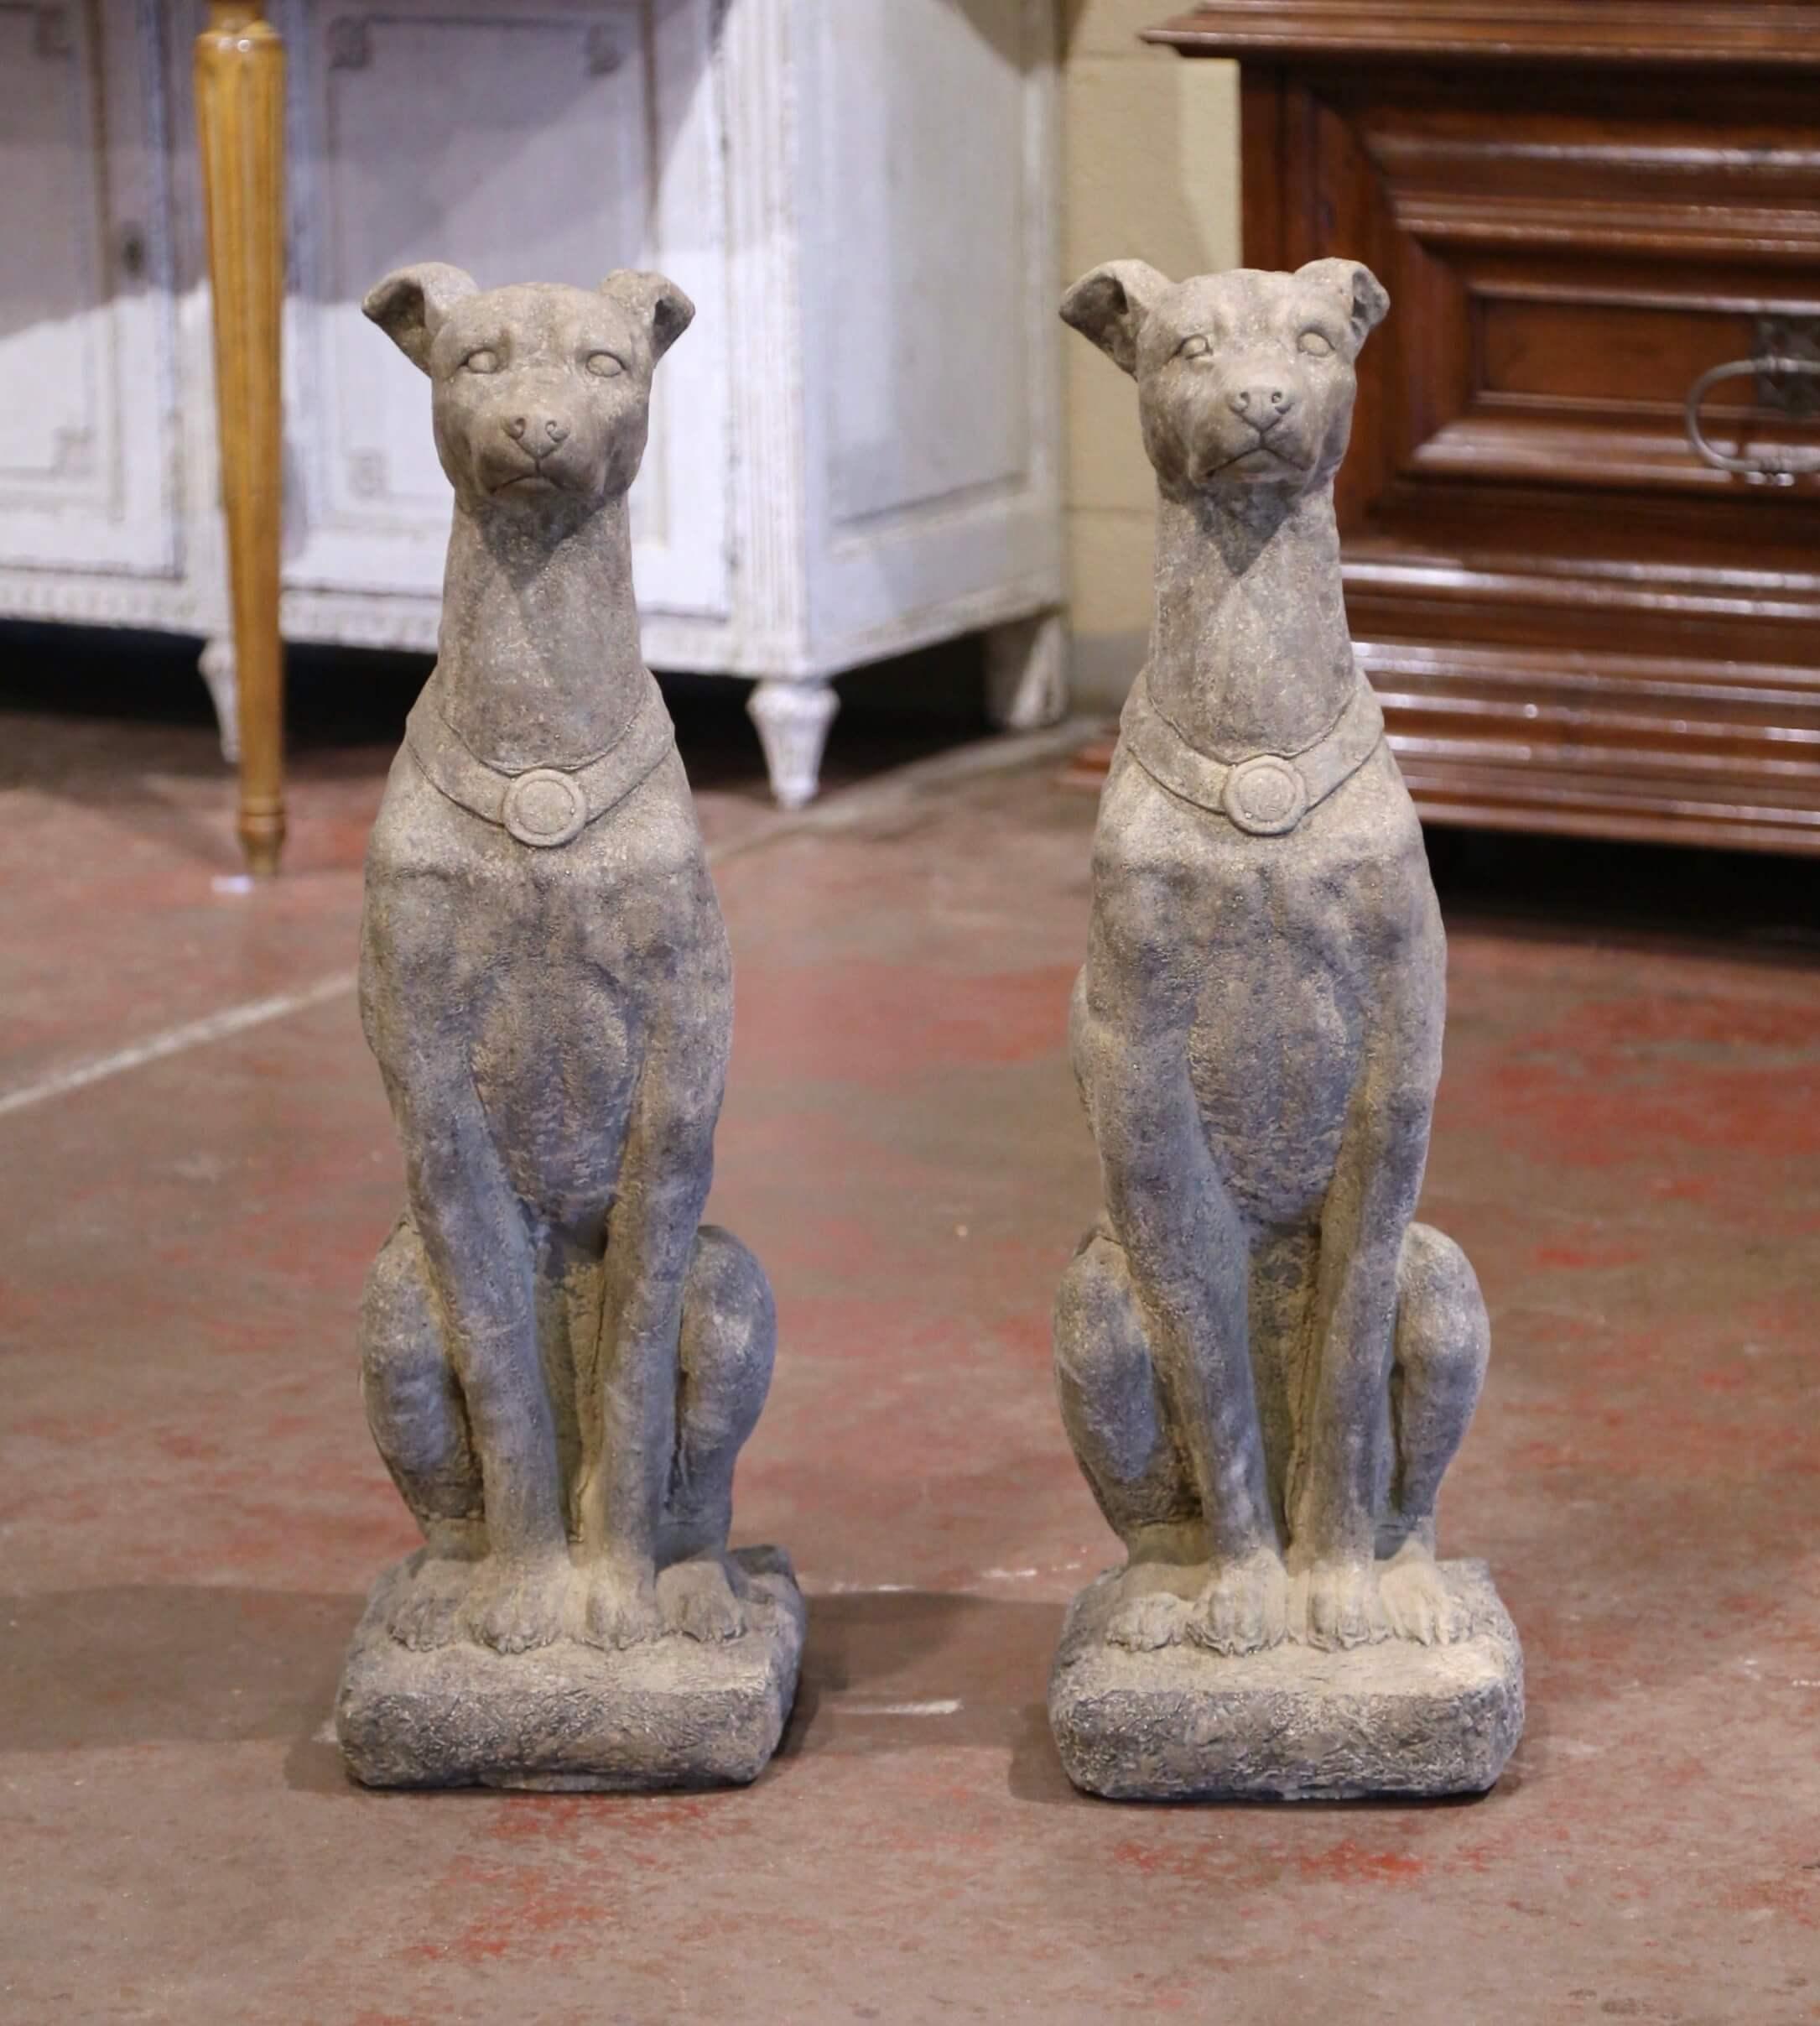 Carved of stone circa 1970, the tall vintage greyhounds are set on a flat carved, rectangular base; seated on their back legs, both dogs have a proud expression further embellished with a collar around their neck. The garden sculpted canines have a